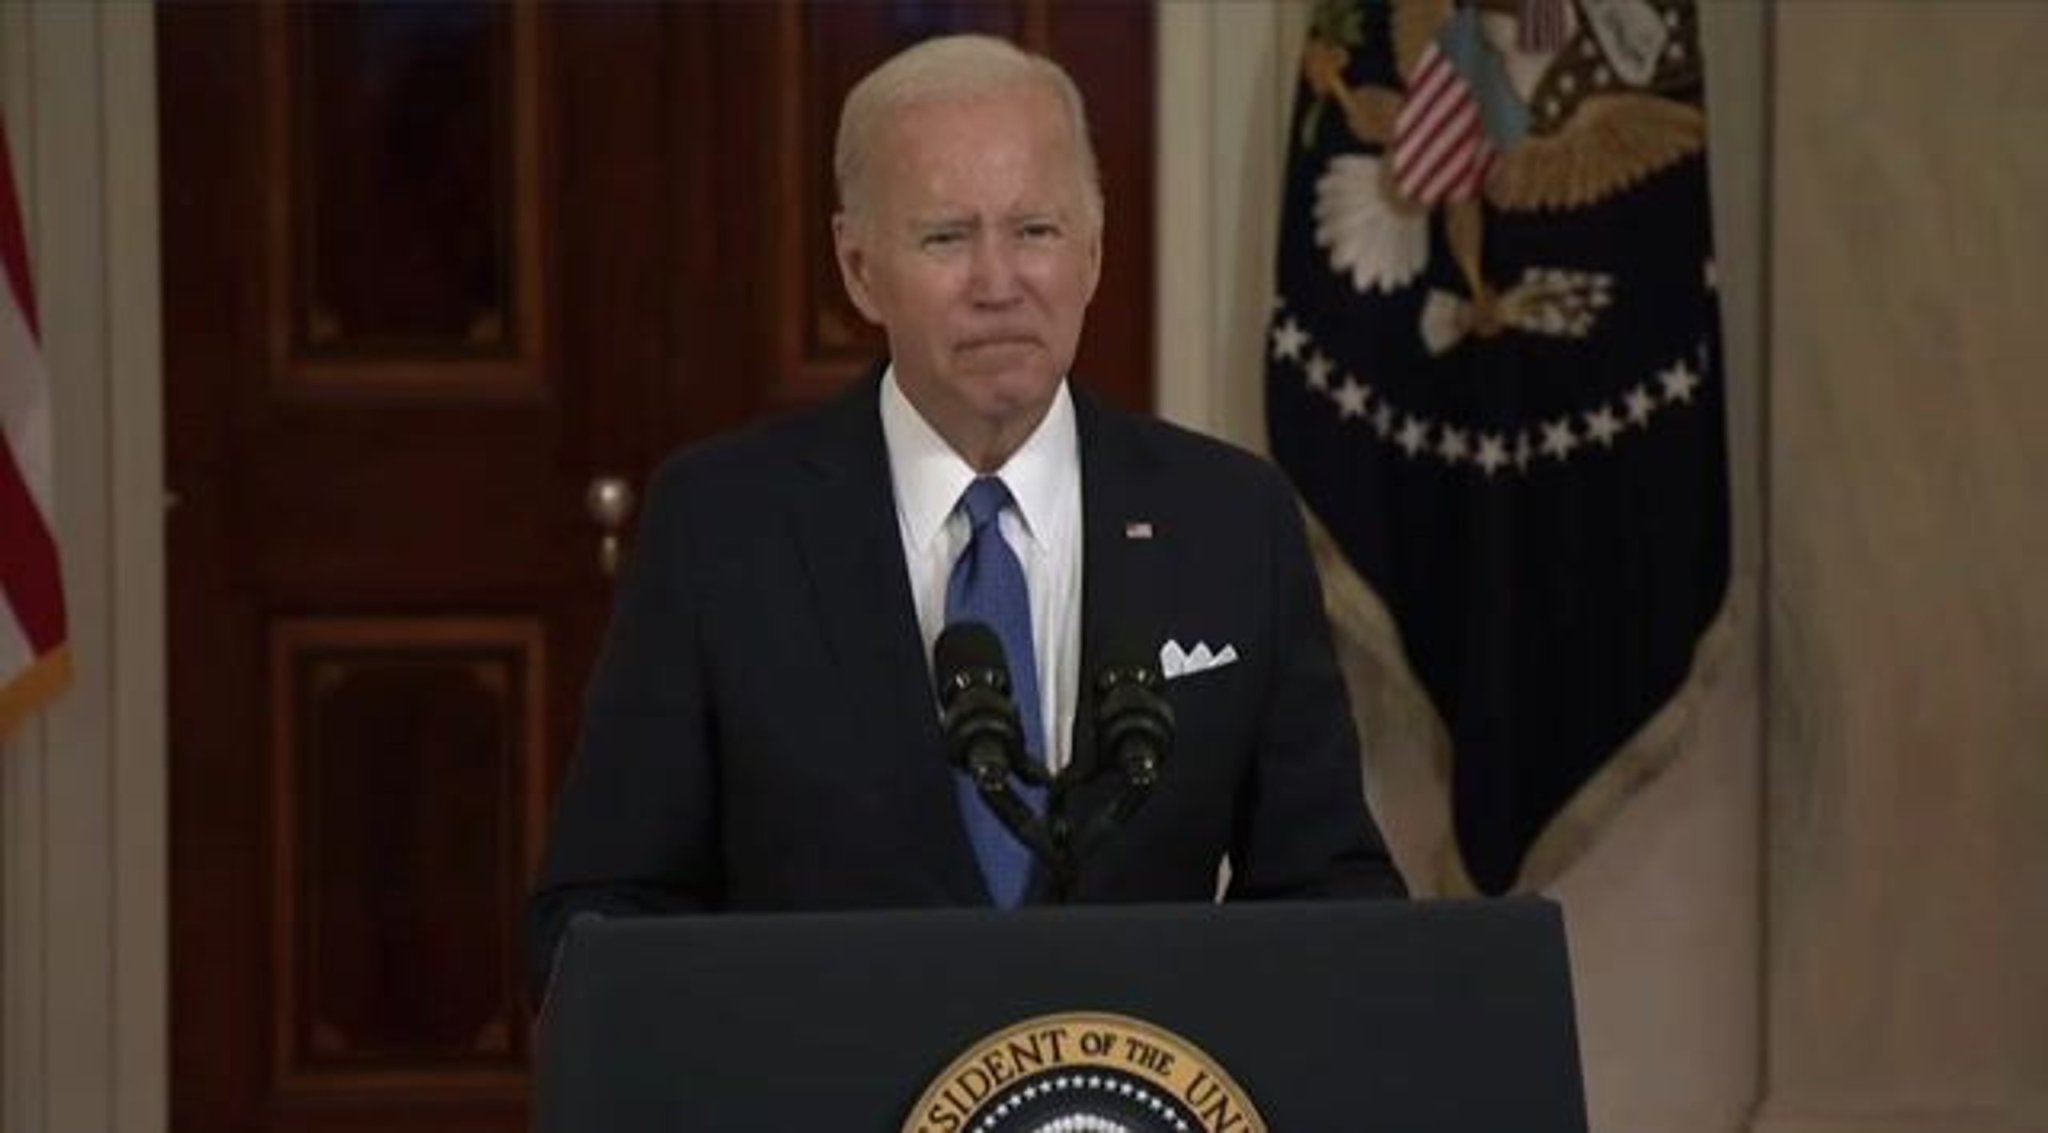 President Biden warns about risks to "right to privacy" following Roe v. Wade reversal.